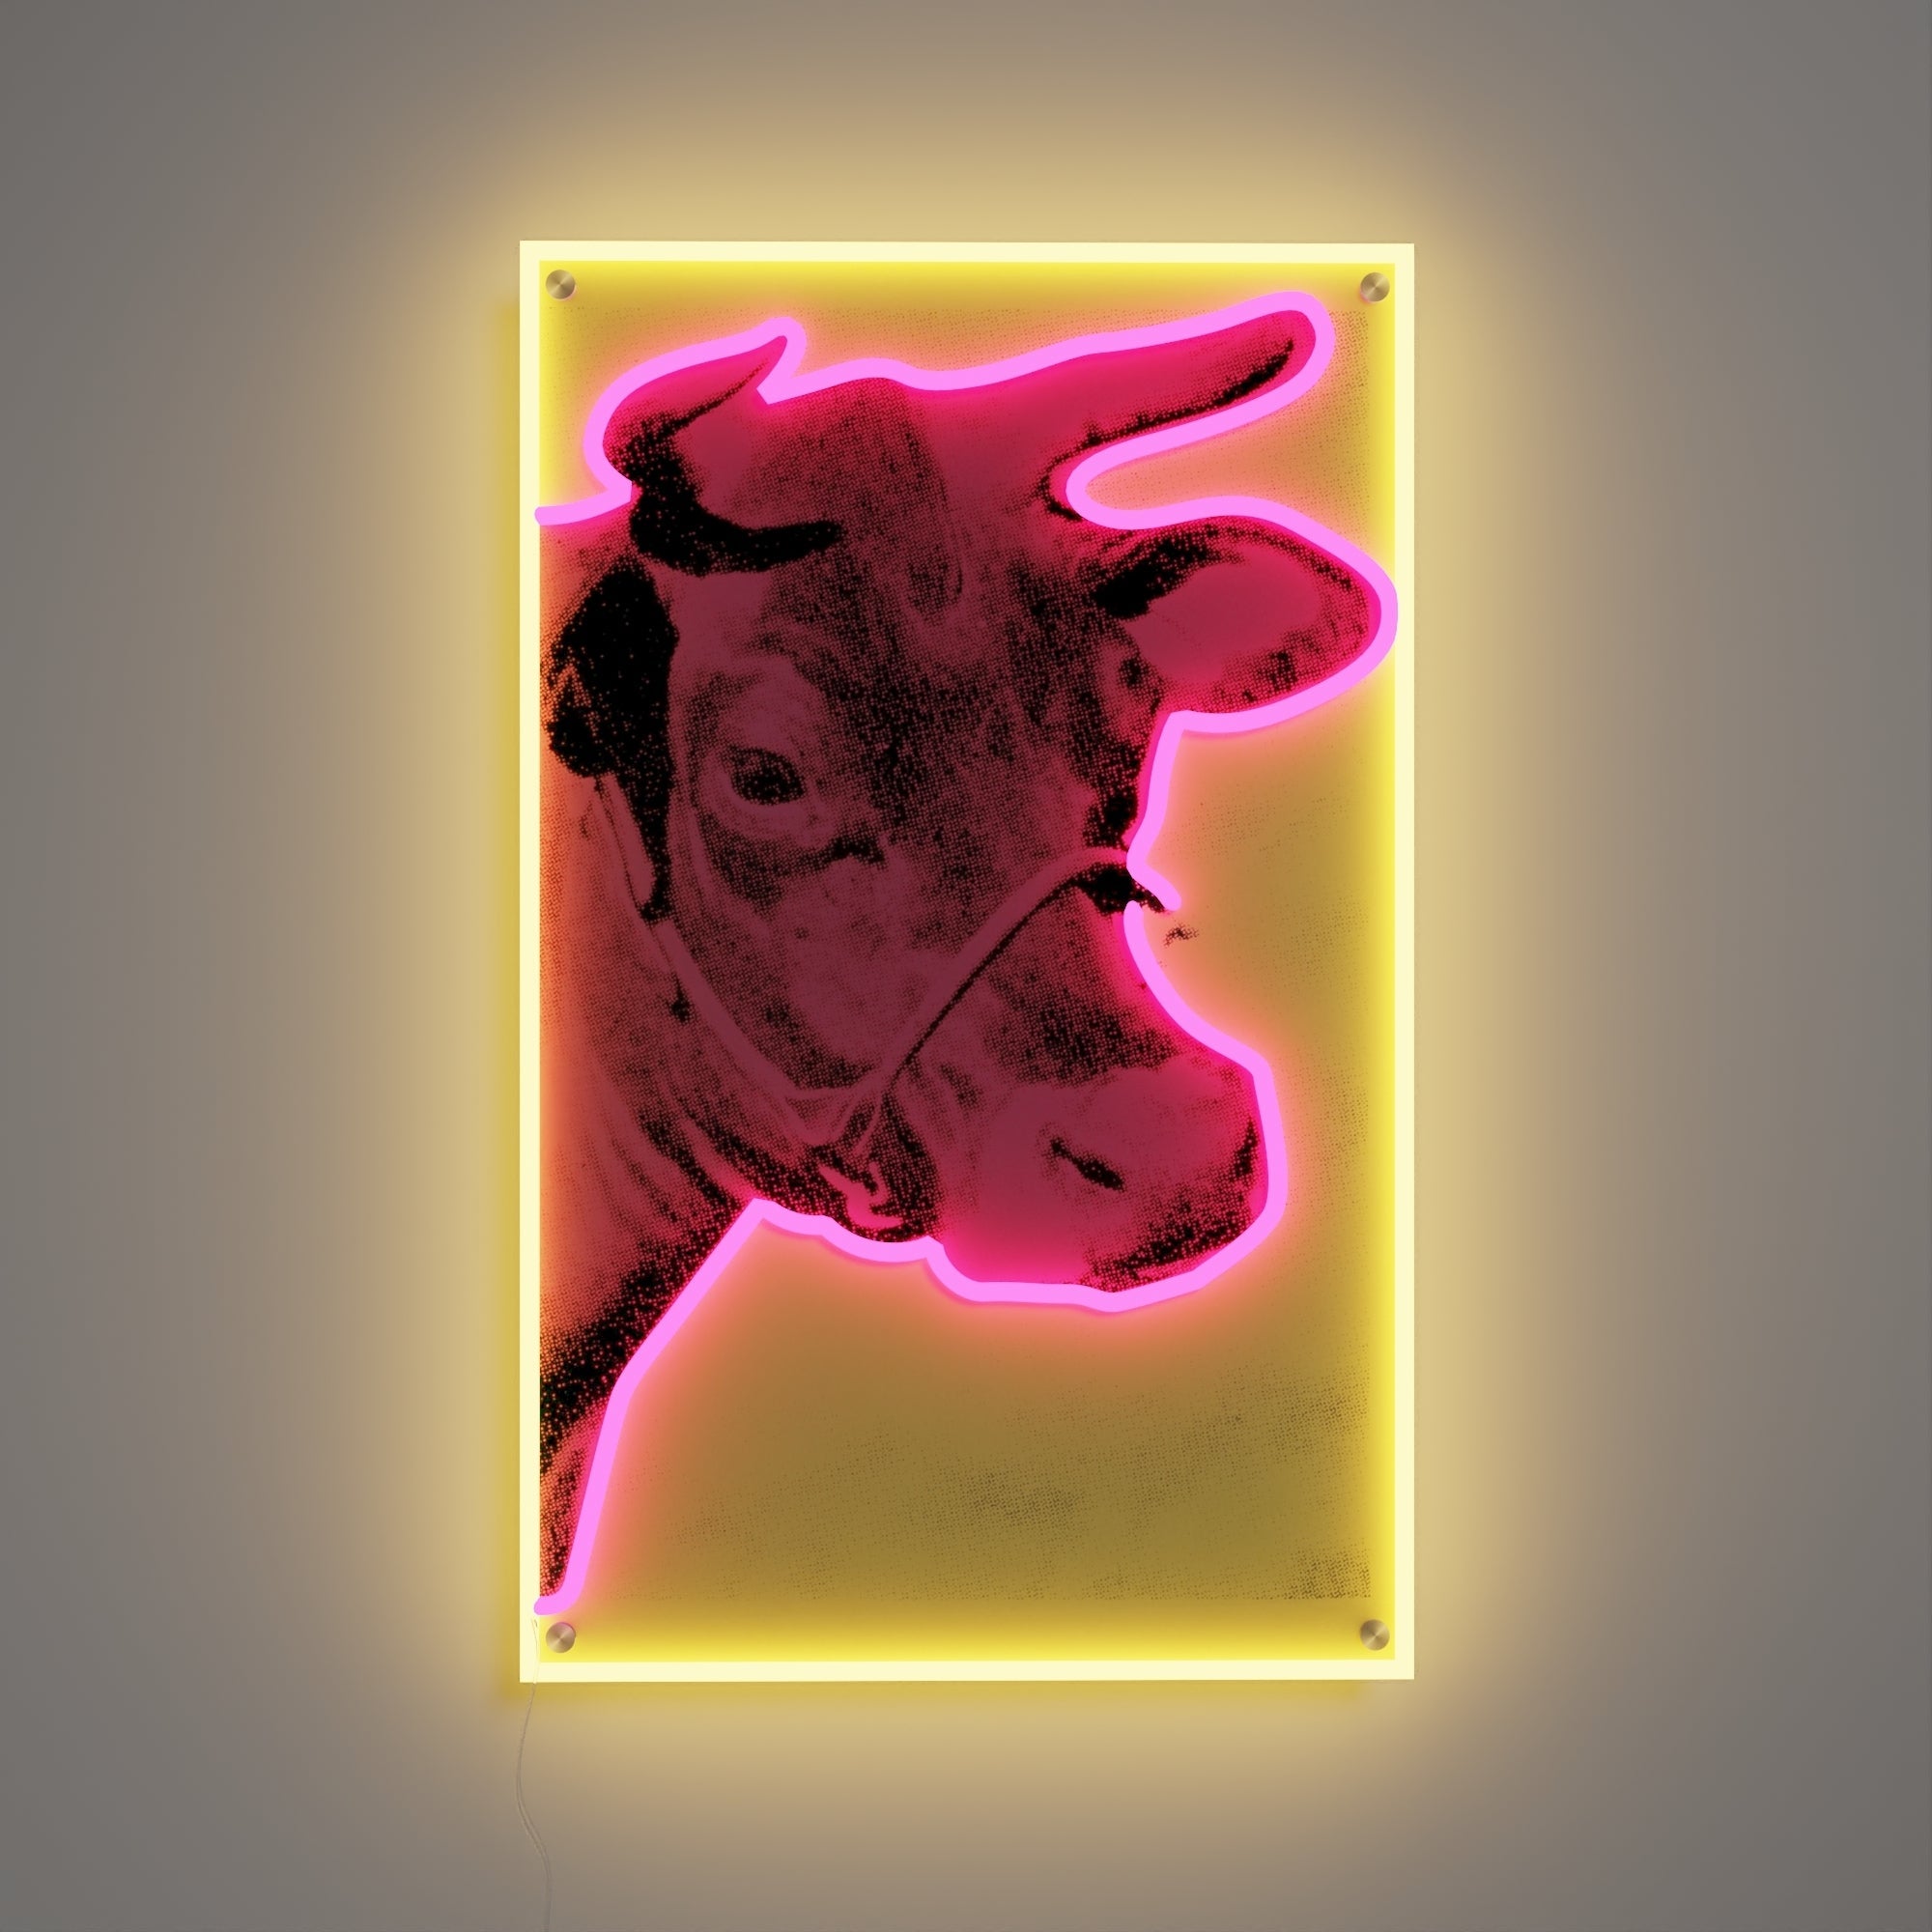 Cow by Andy Warhol - Neon Tabela - Neonbir